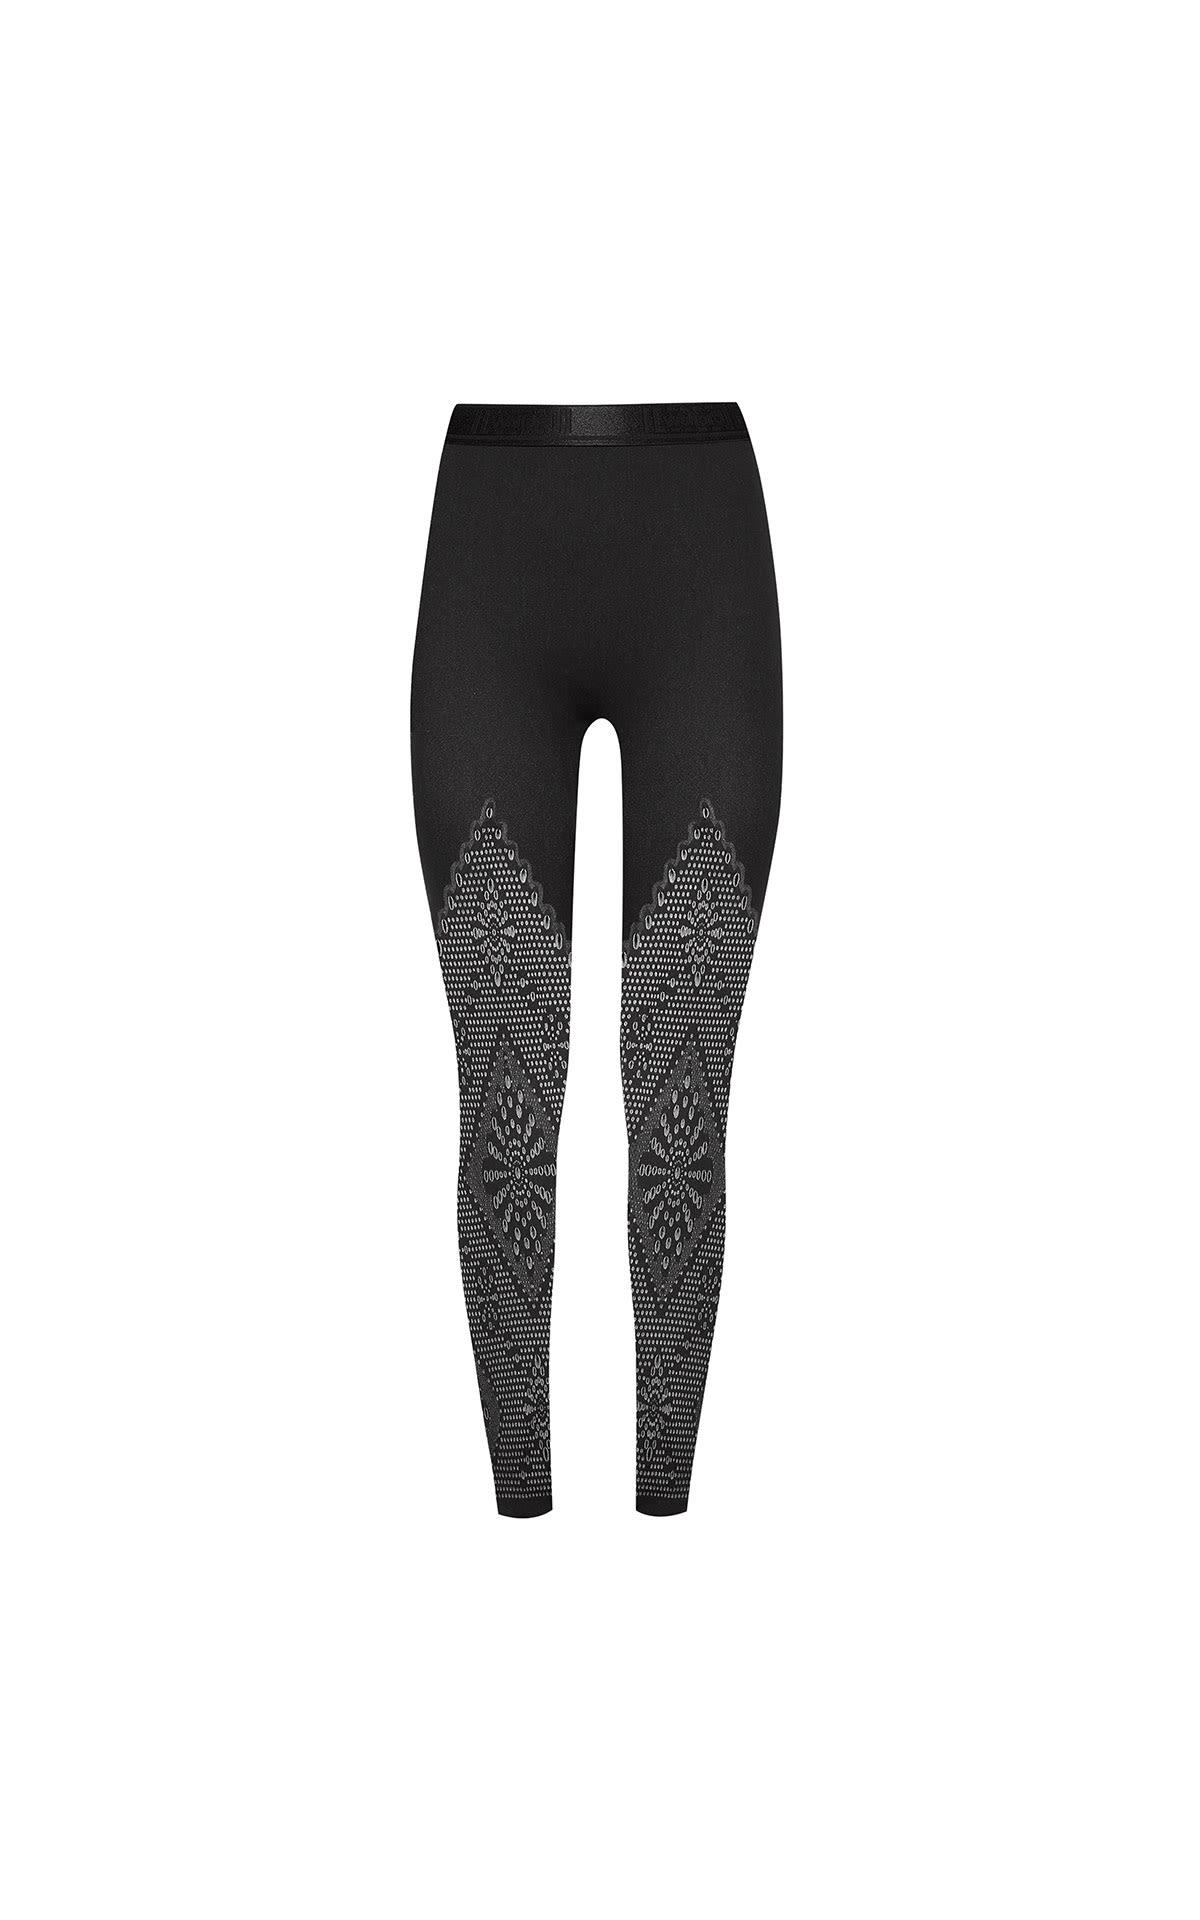 Wolford Marina 7/8 leggings from Bicester Village